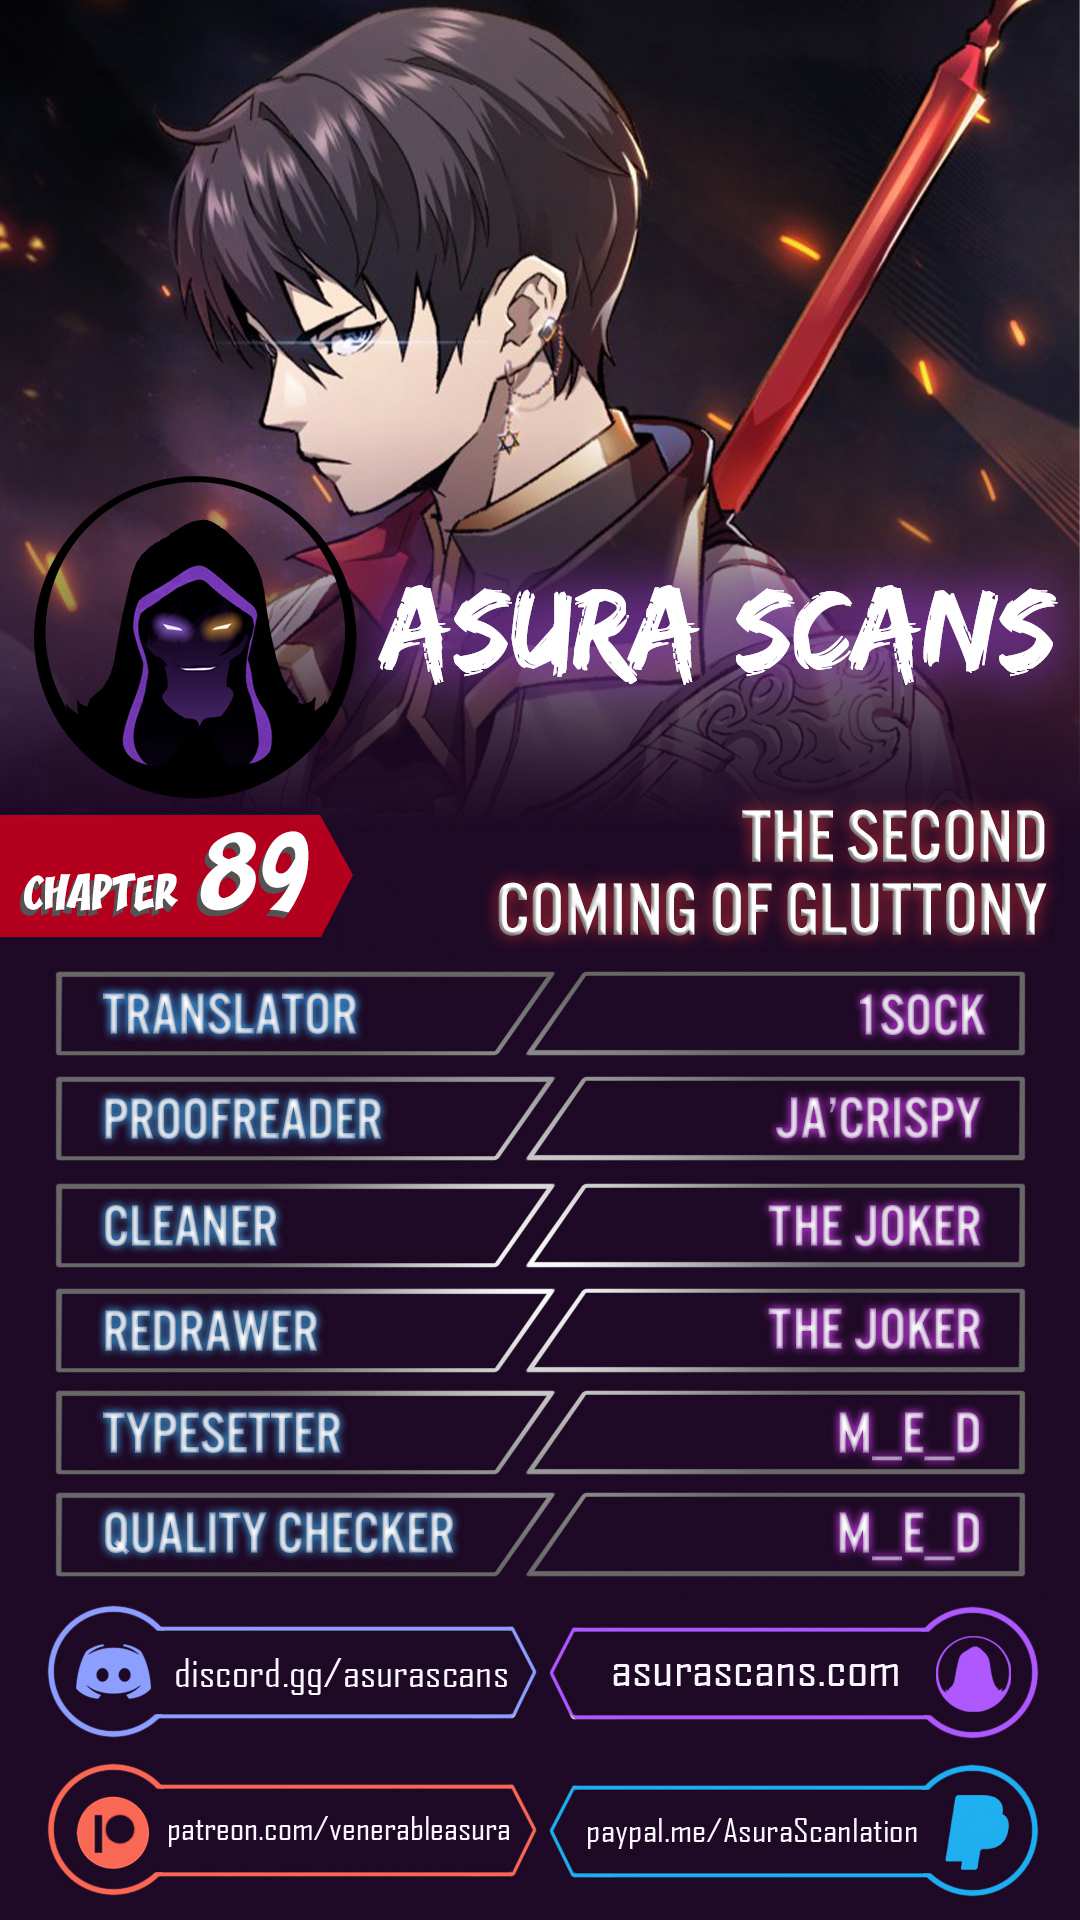 The Second Coming of Gluttony Chapter 89